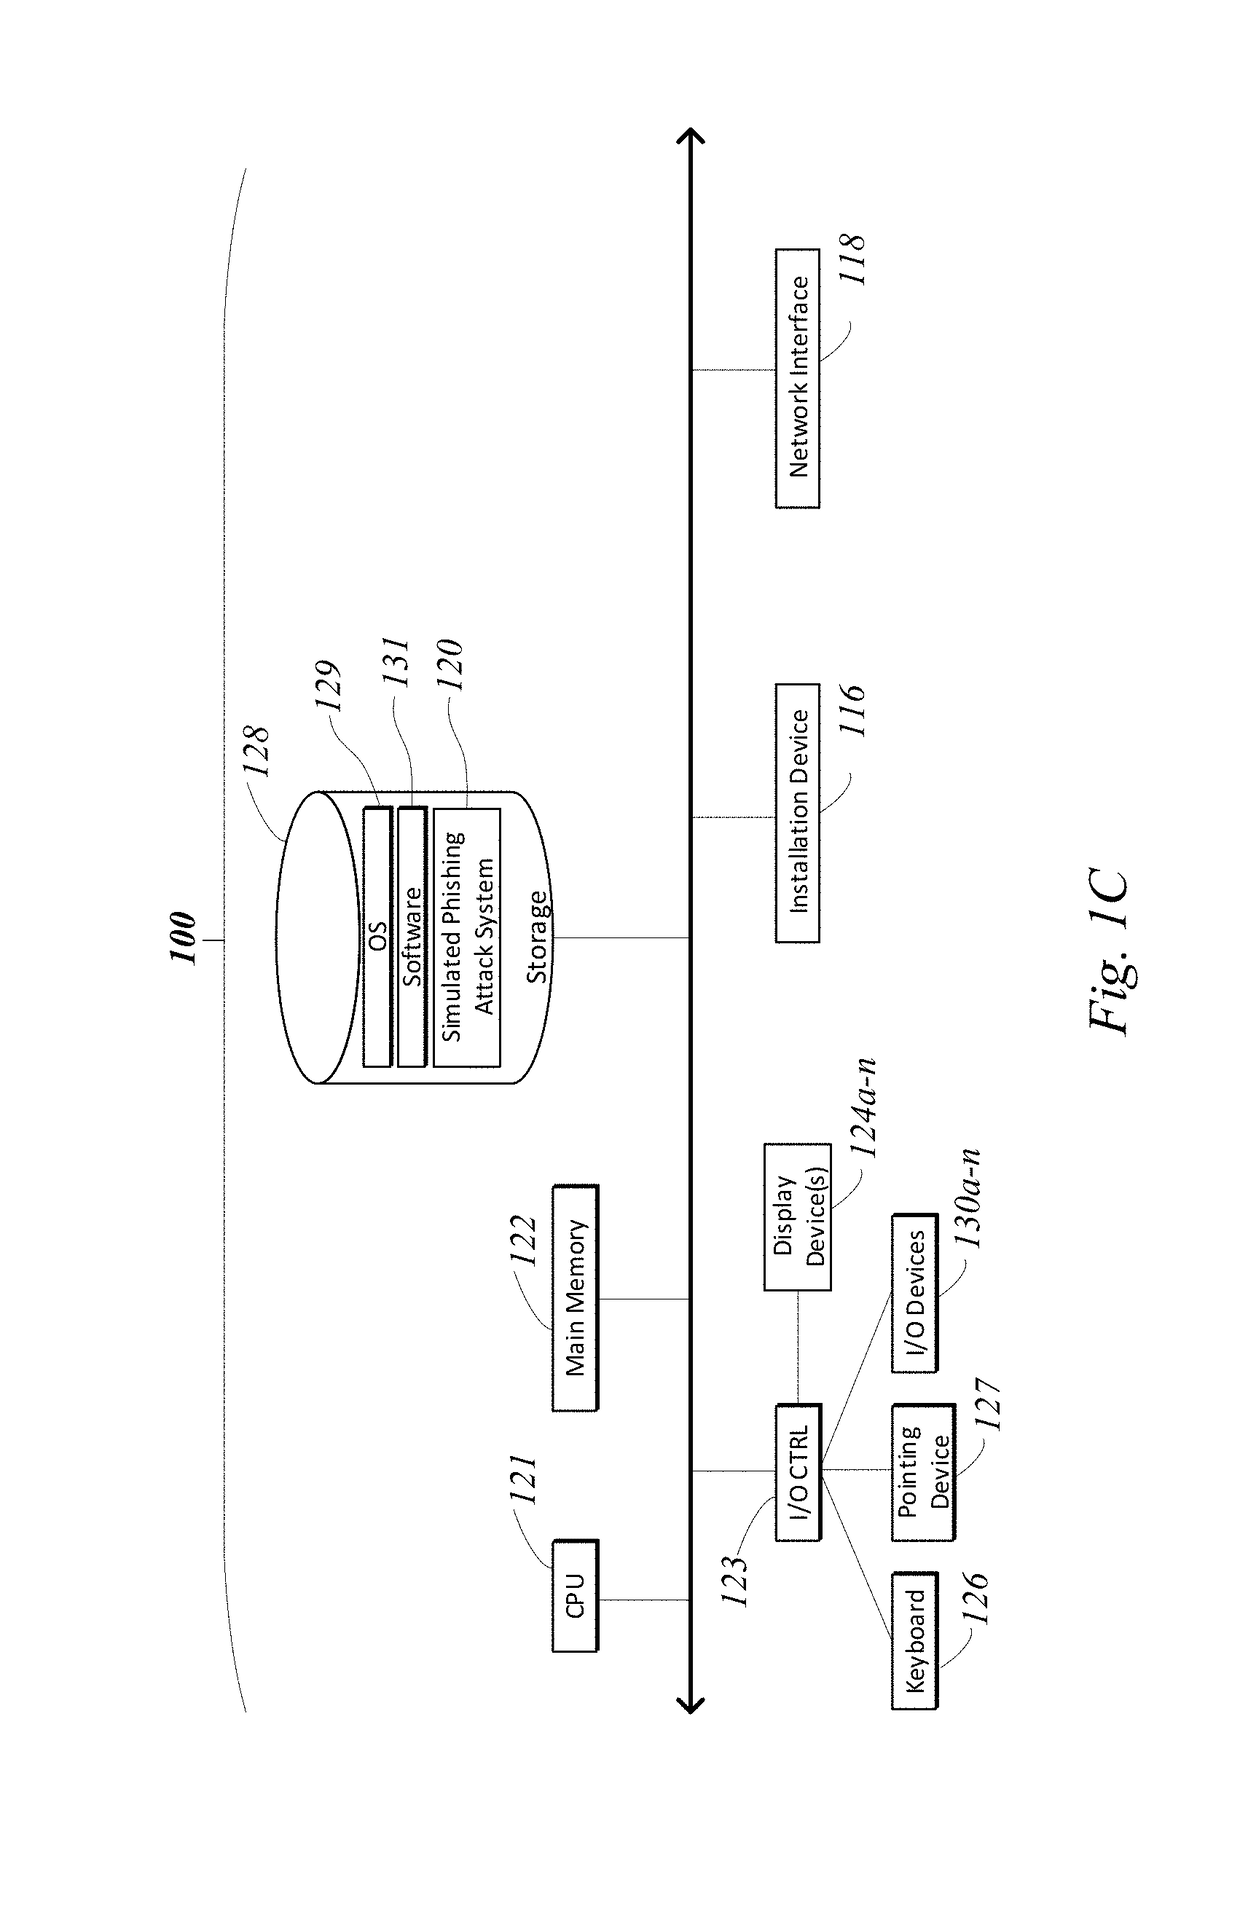 Systems and methods for using attribute data for system protection and security awareness training